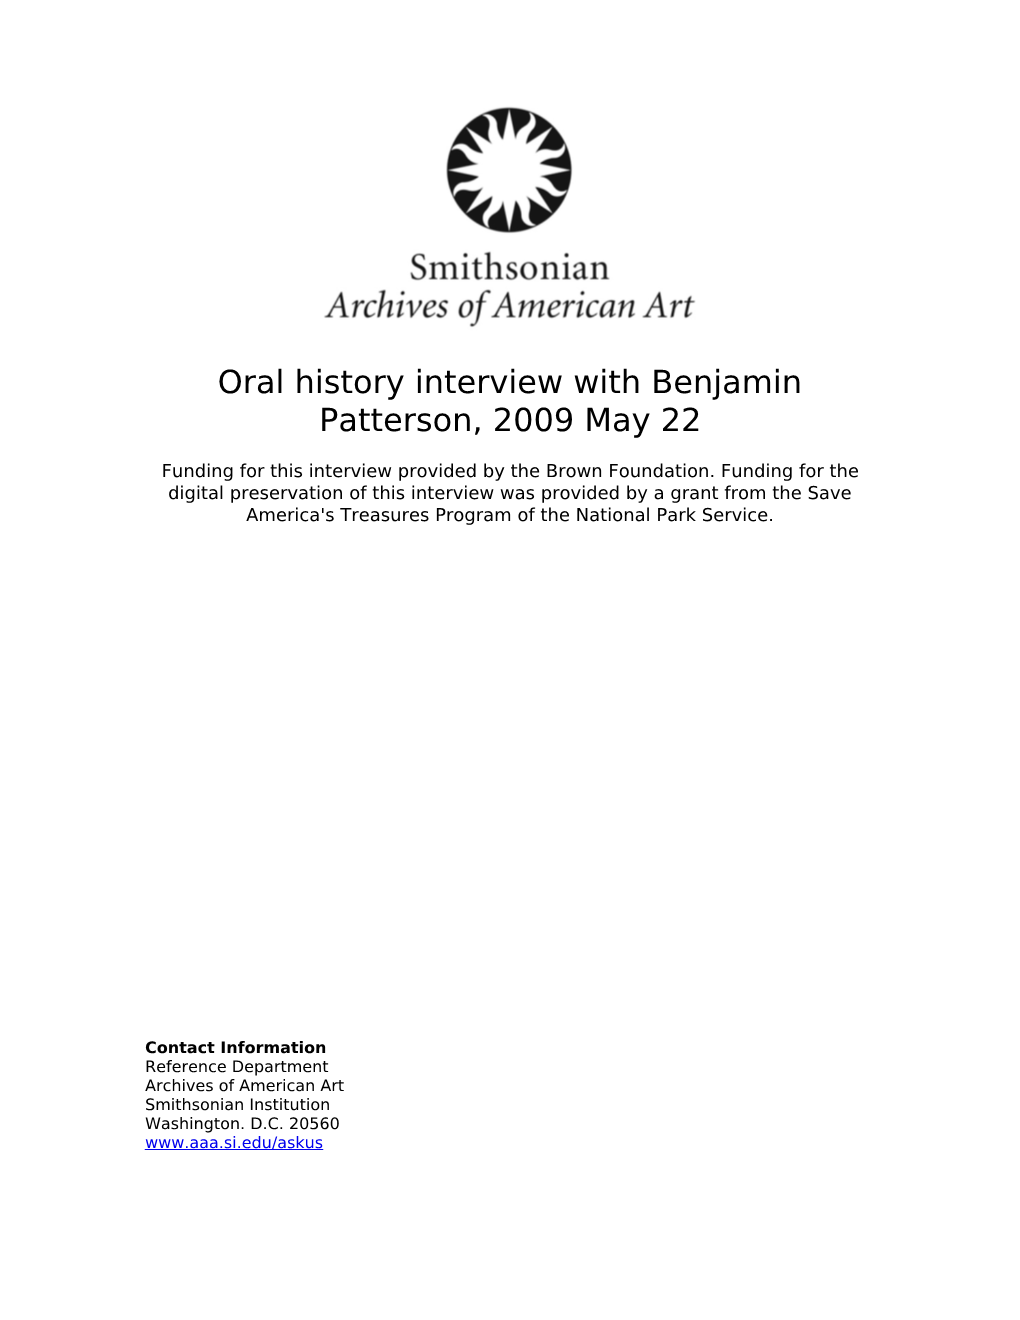 Oral History Interview with Benjamin Patterson, 2009 May 22